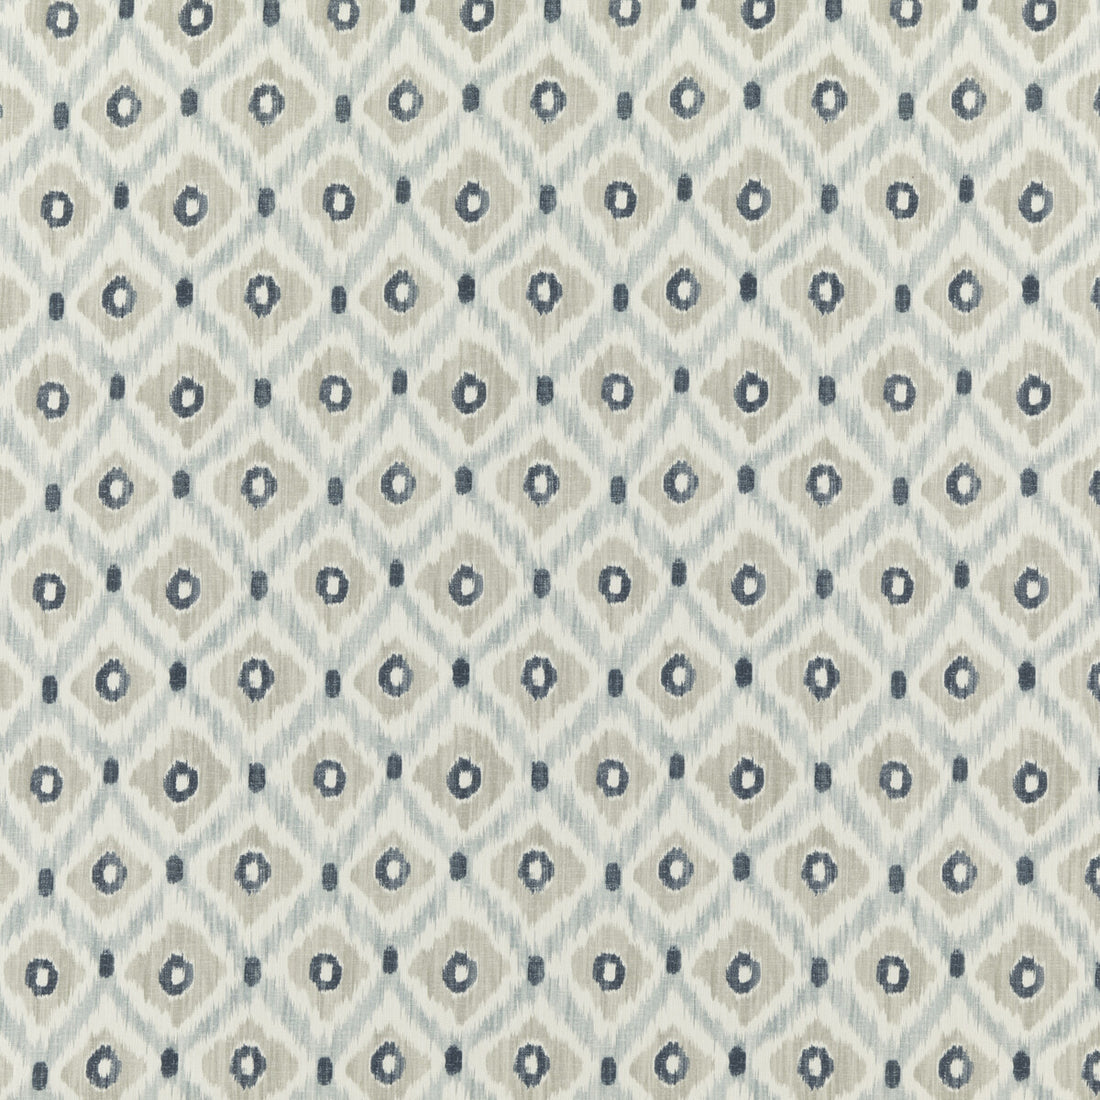 Vasco fabric in indigo/stone color - pattern PP50448.1.0 - by Baker Lifestyle in the Homes &amp; Gardens III collection